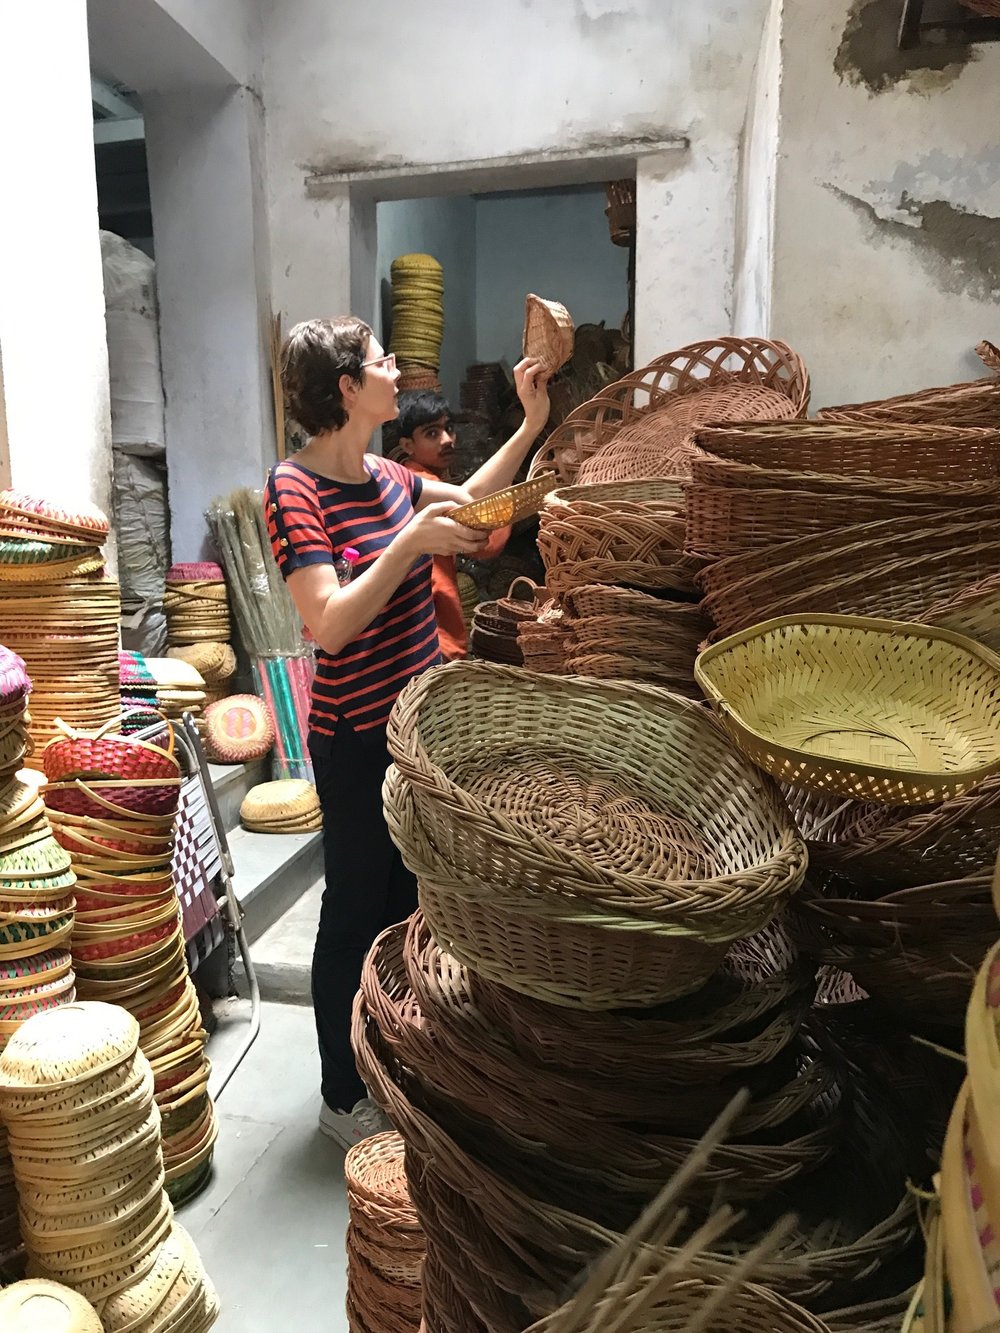 Bamboo baskets in Old Ahmedabad